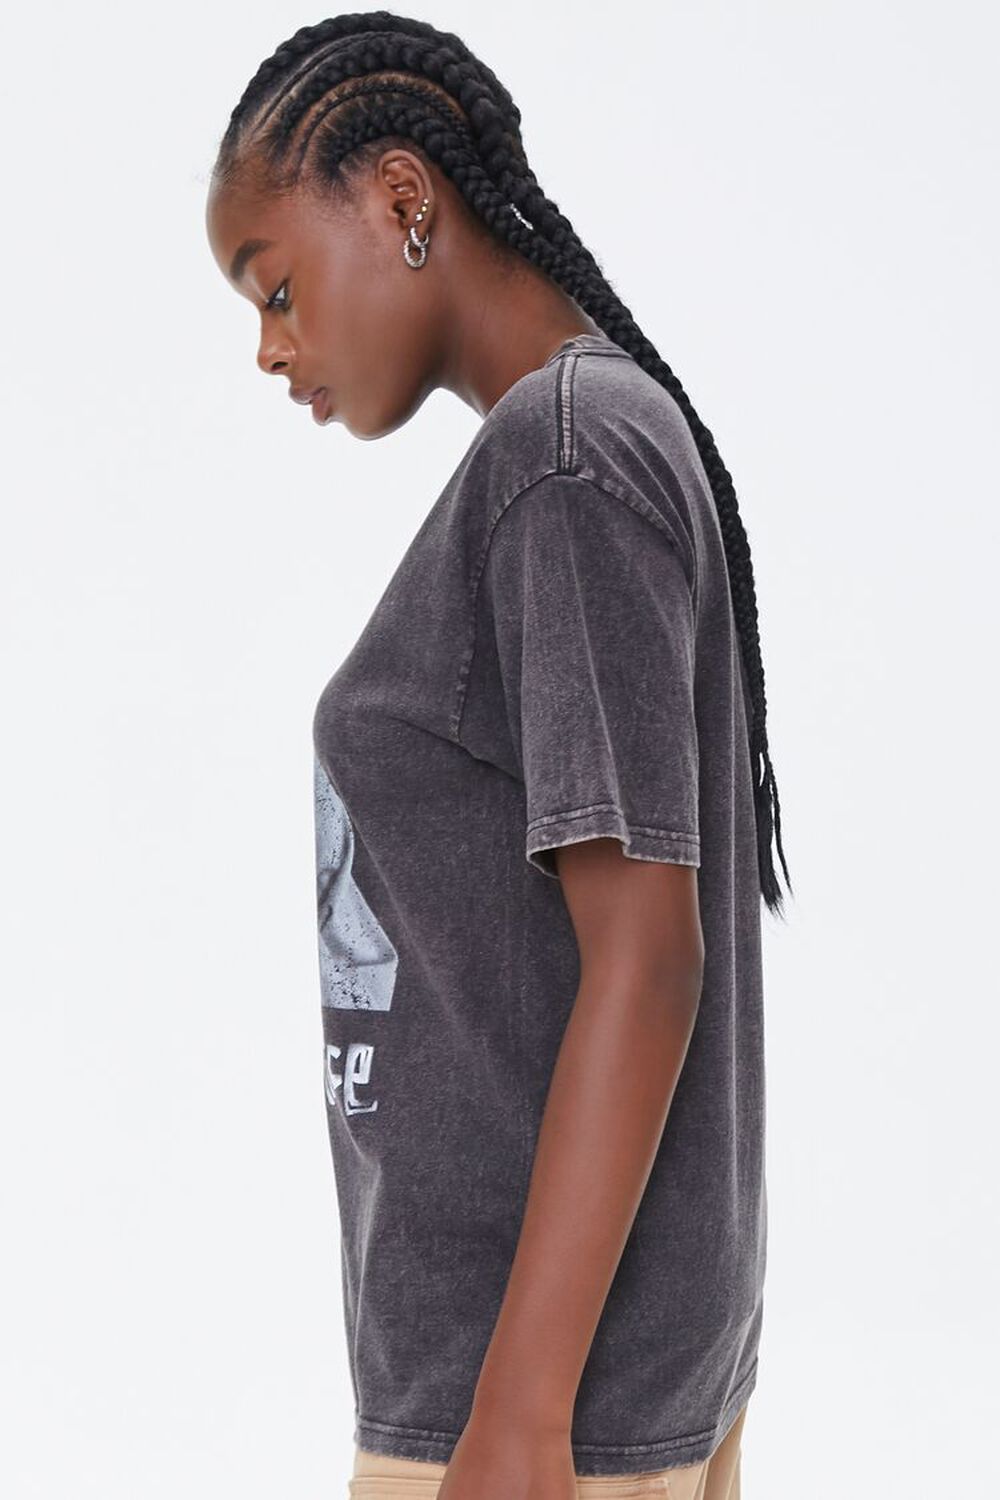 CHARCOAL/MULTI Poetic Justice Graphic Tee, image 2